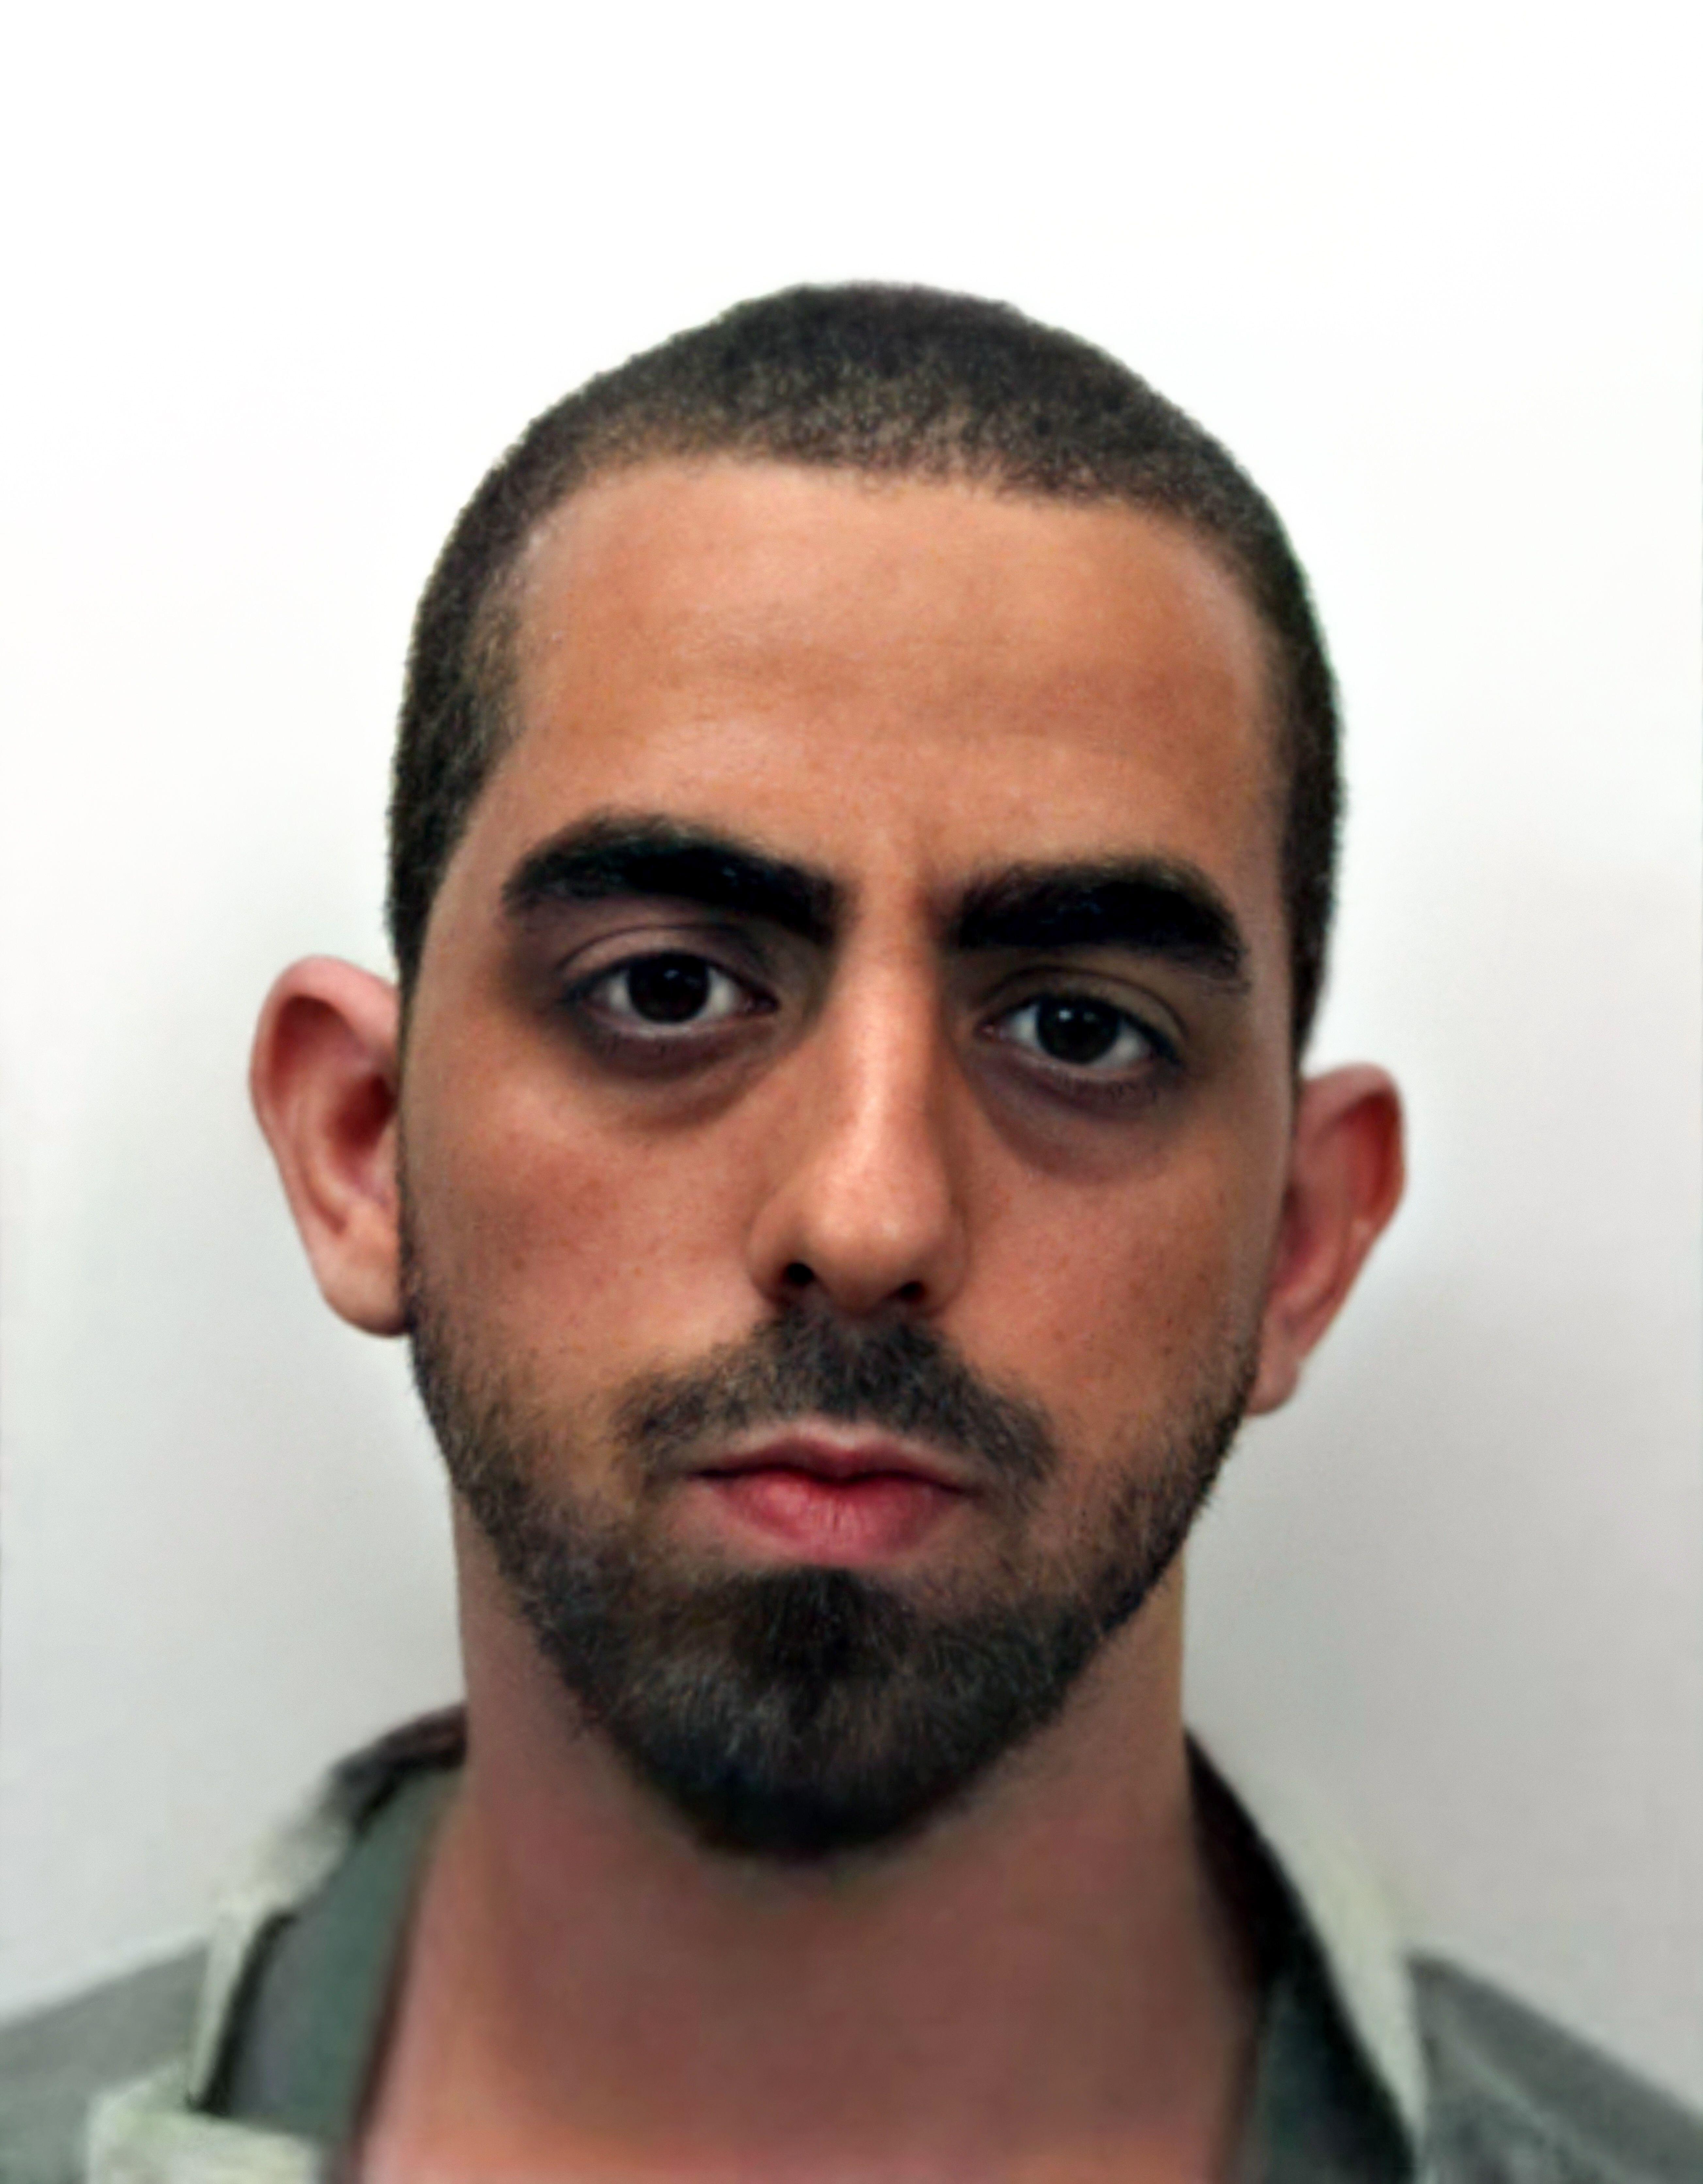 Sir Salman Rushdie attacker makes second US court appearance (Alamy/PA)